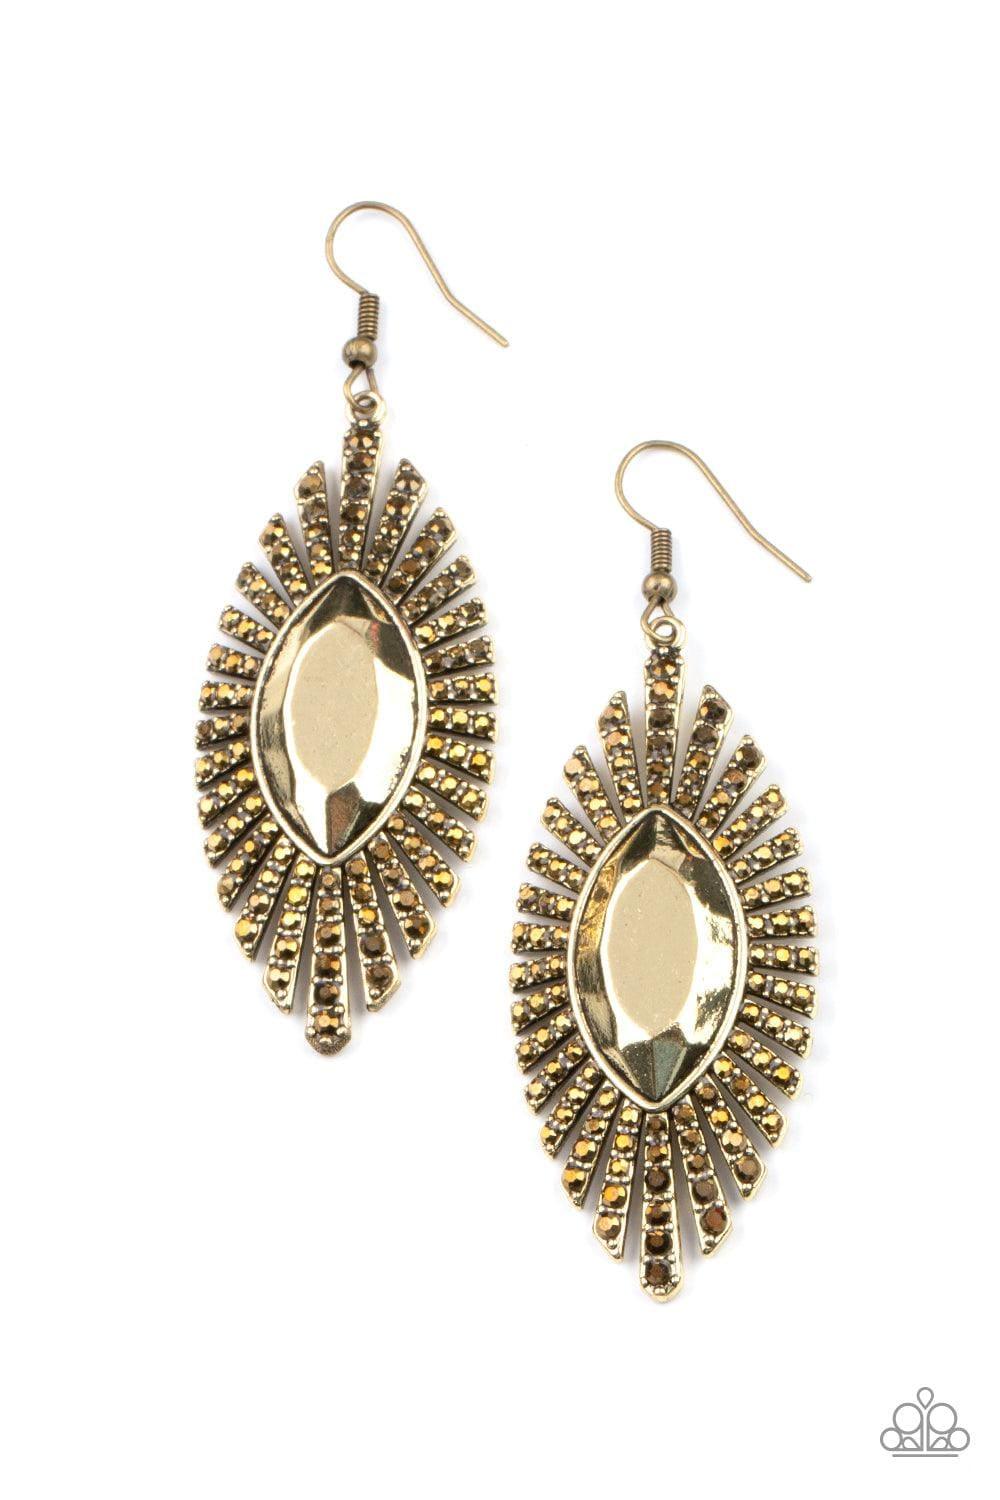 Paparazzi Accessories - Who Is The Fiercest Of Them All - Brass Earrings - Bling by JessieK